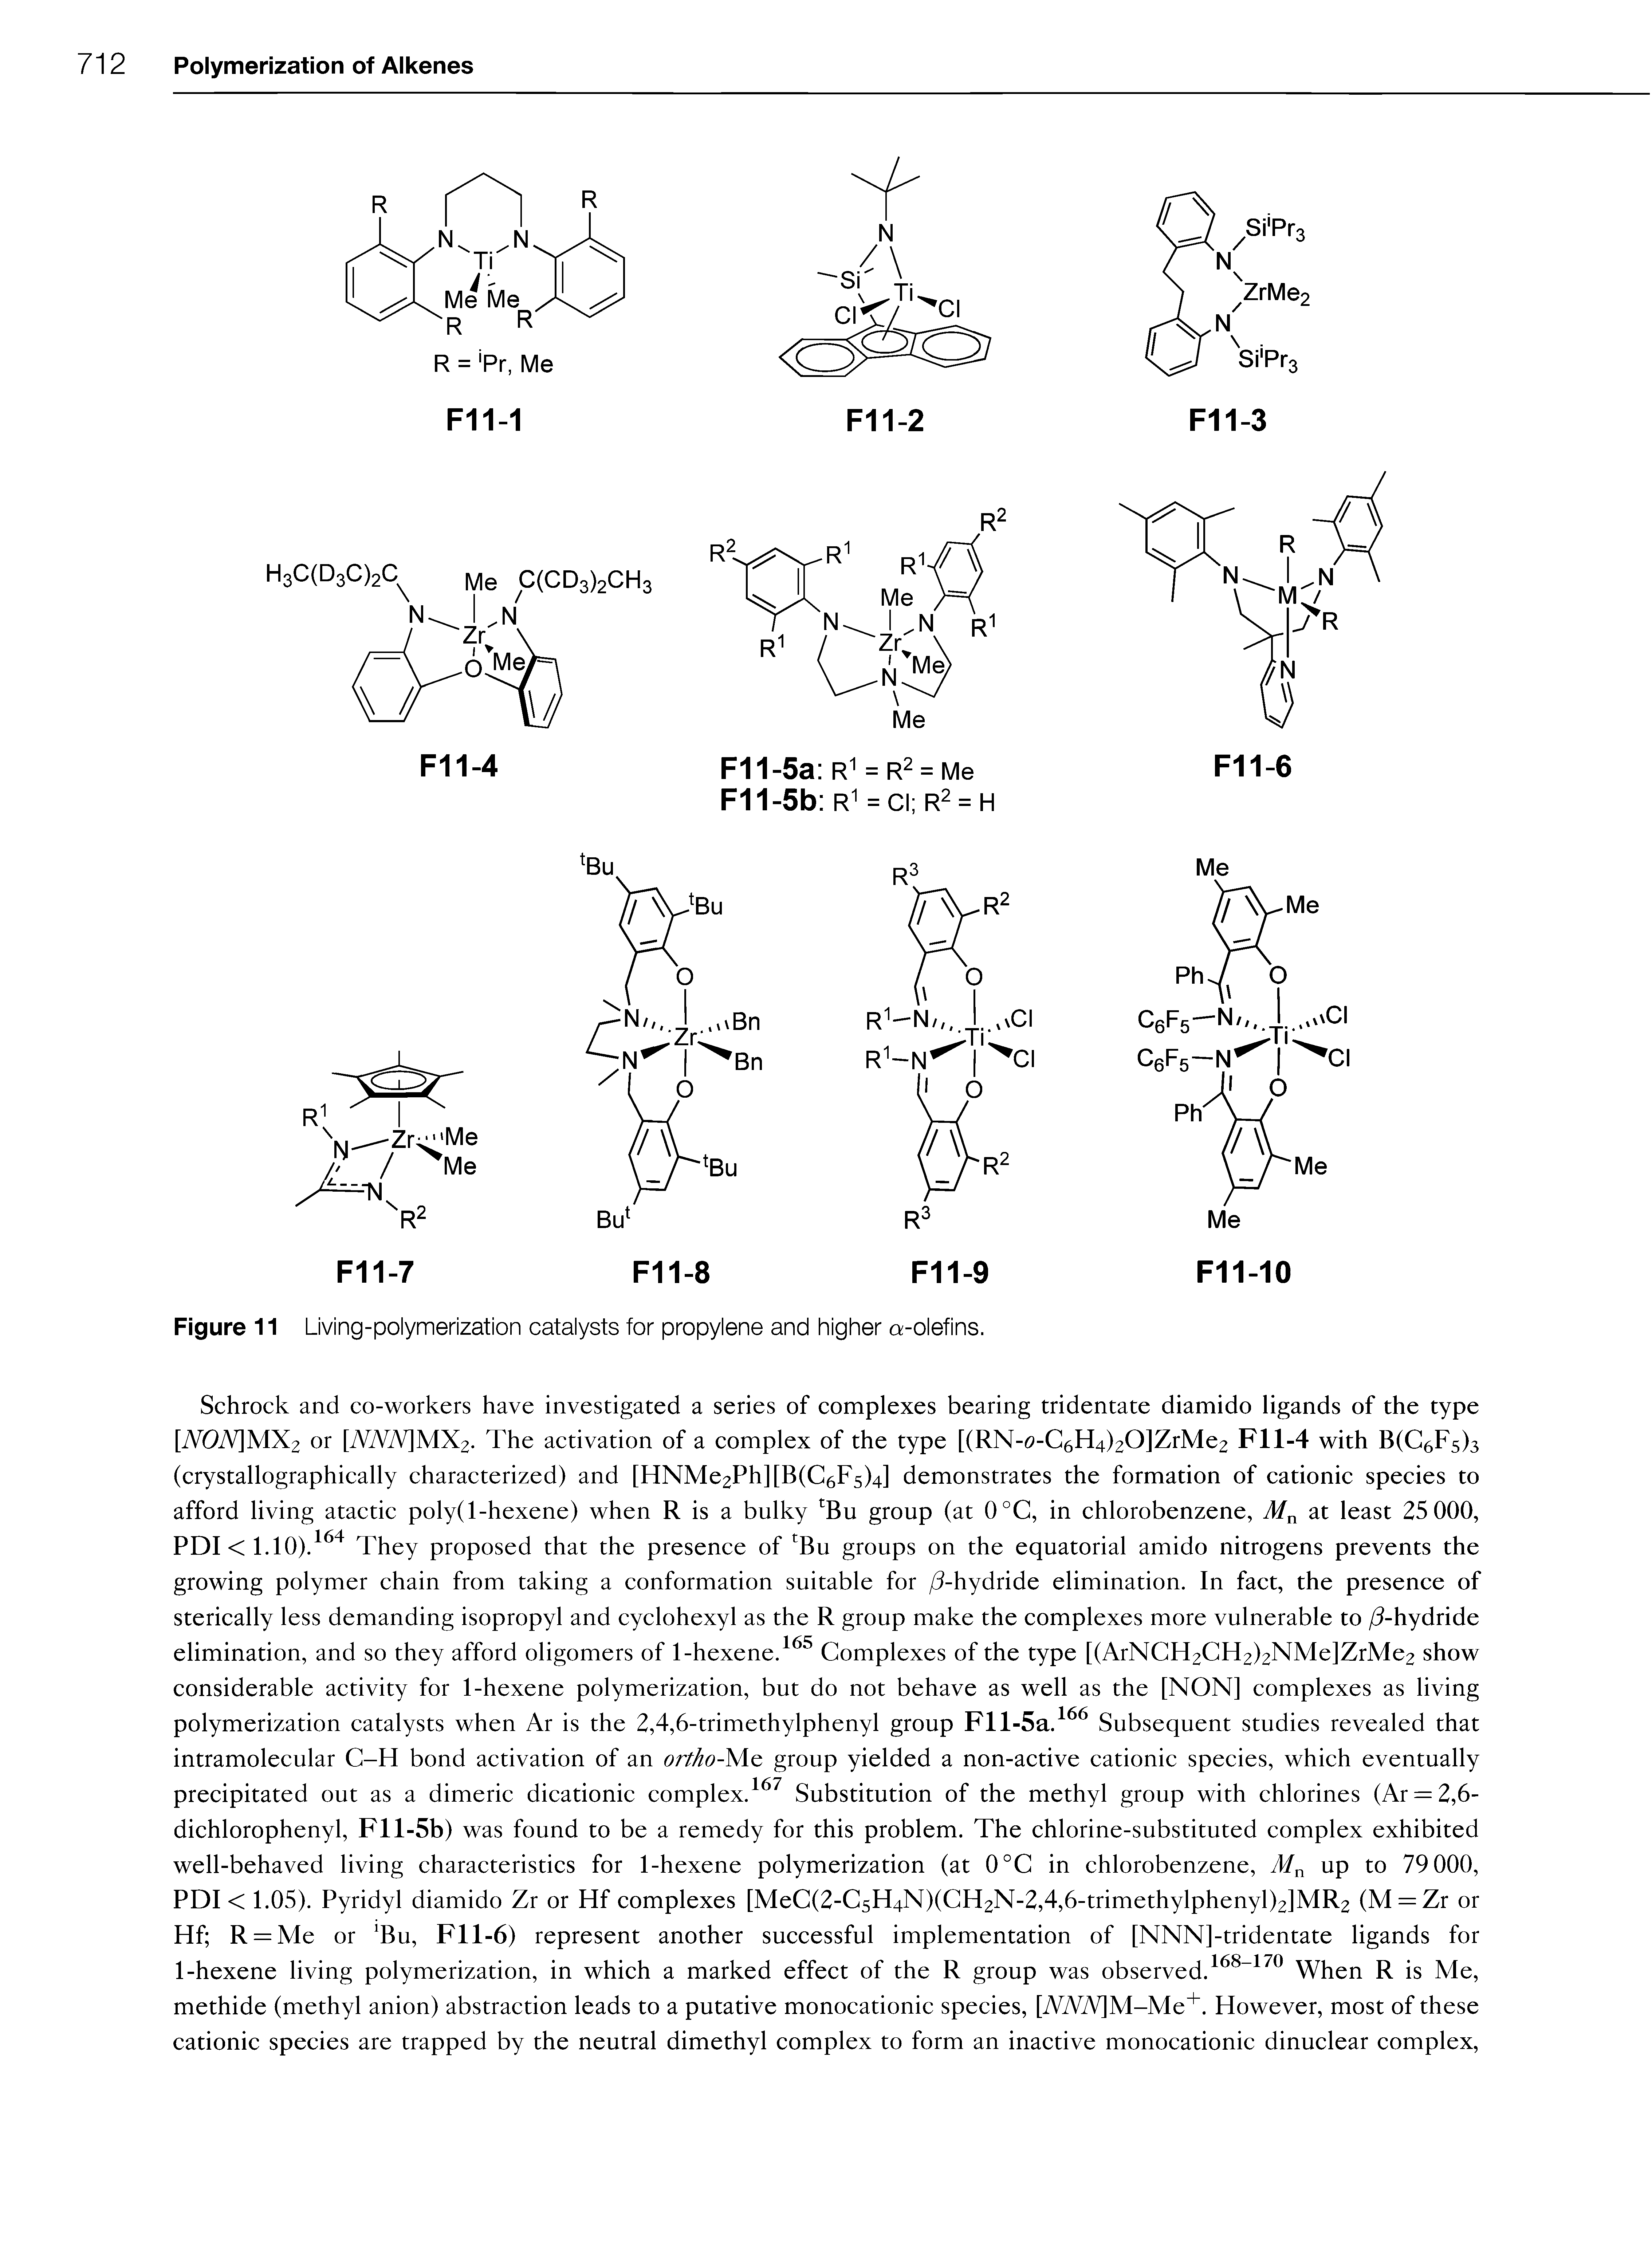 Figure 11 Living-polymerization catalysts for propylene and higher a-olefins.